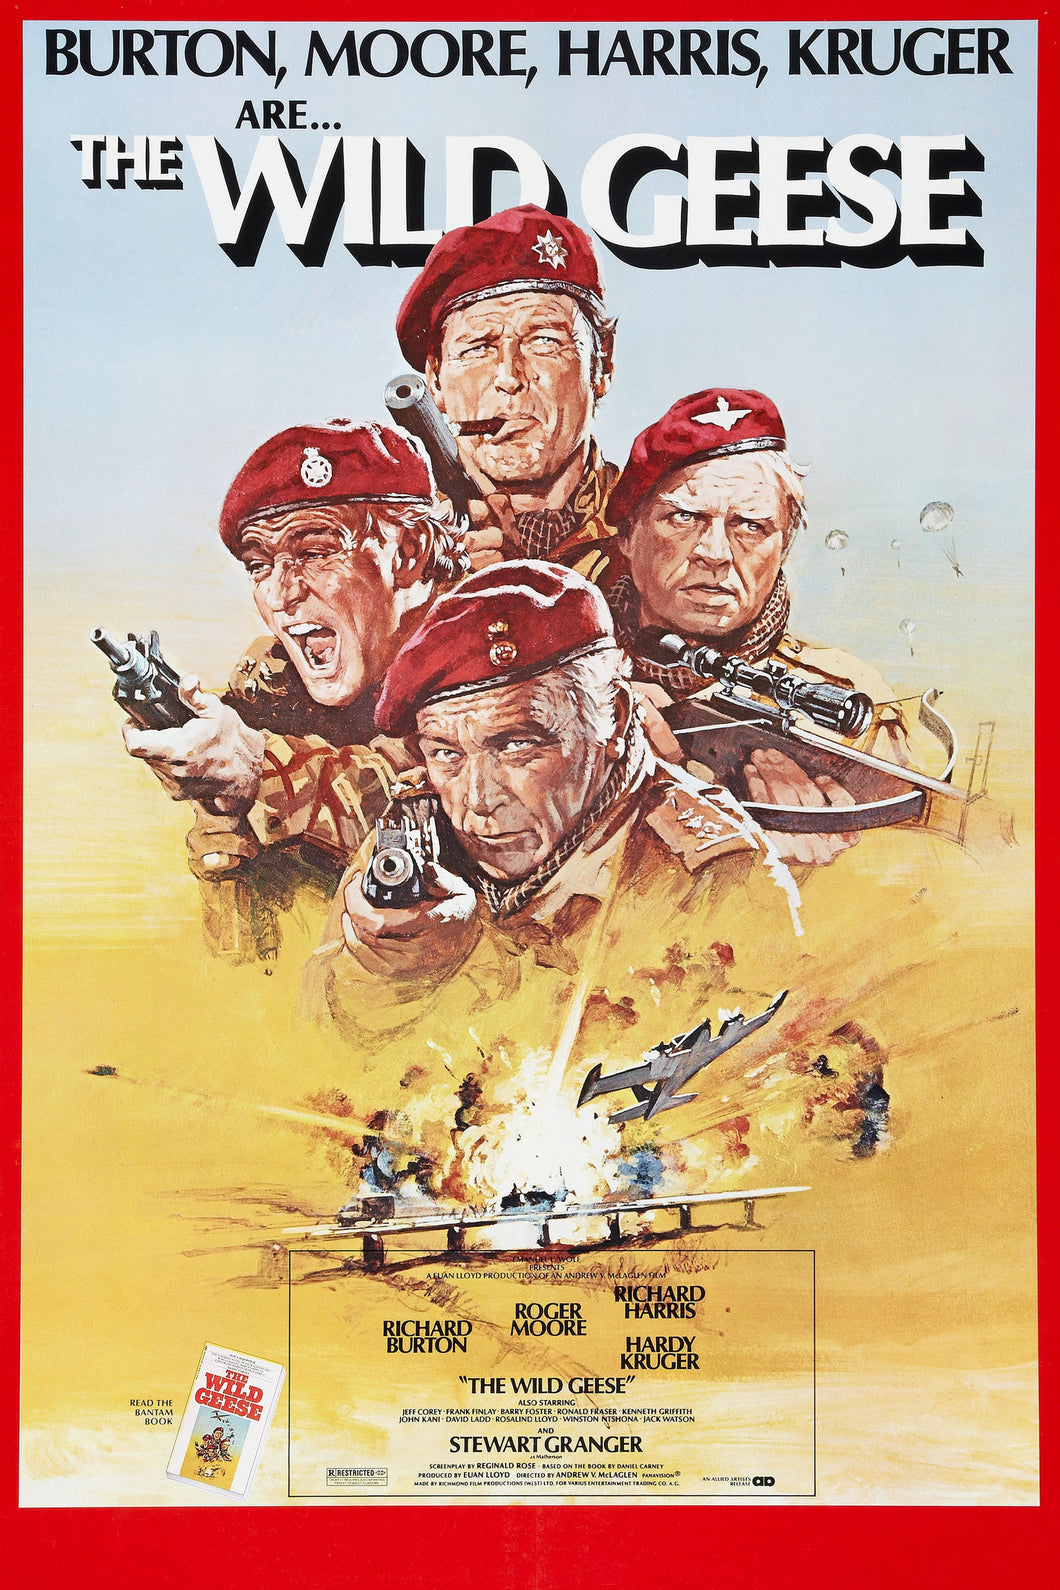 The Wild Geese (1978) Movie Poster High Quality Glossy Paper A1 A2 A3 A4 A3 Framed or Unframed!!!